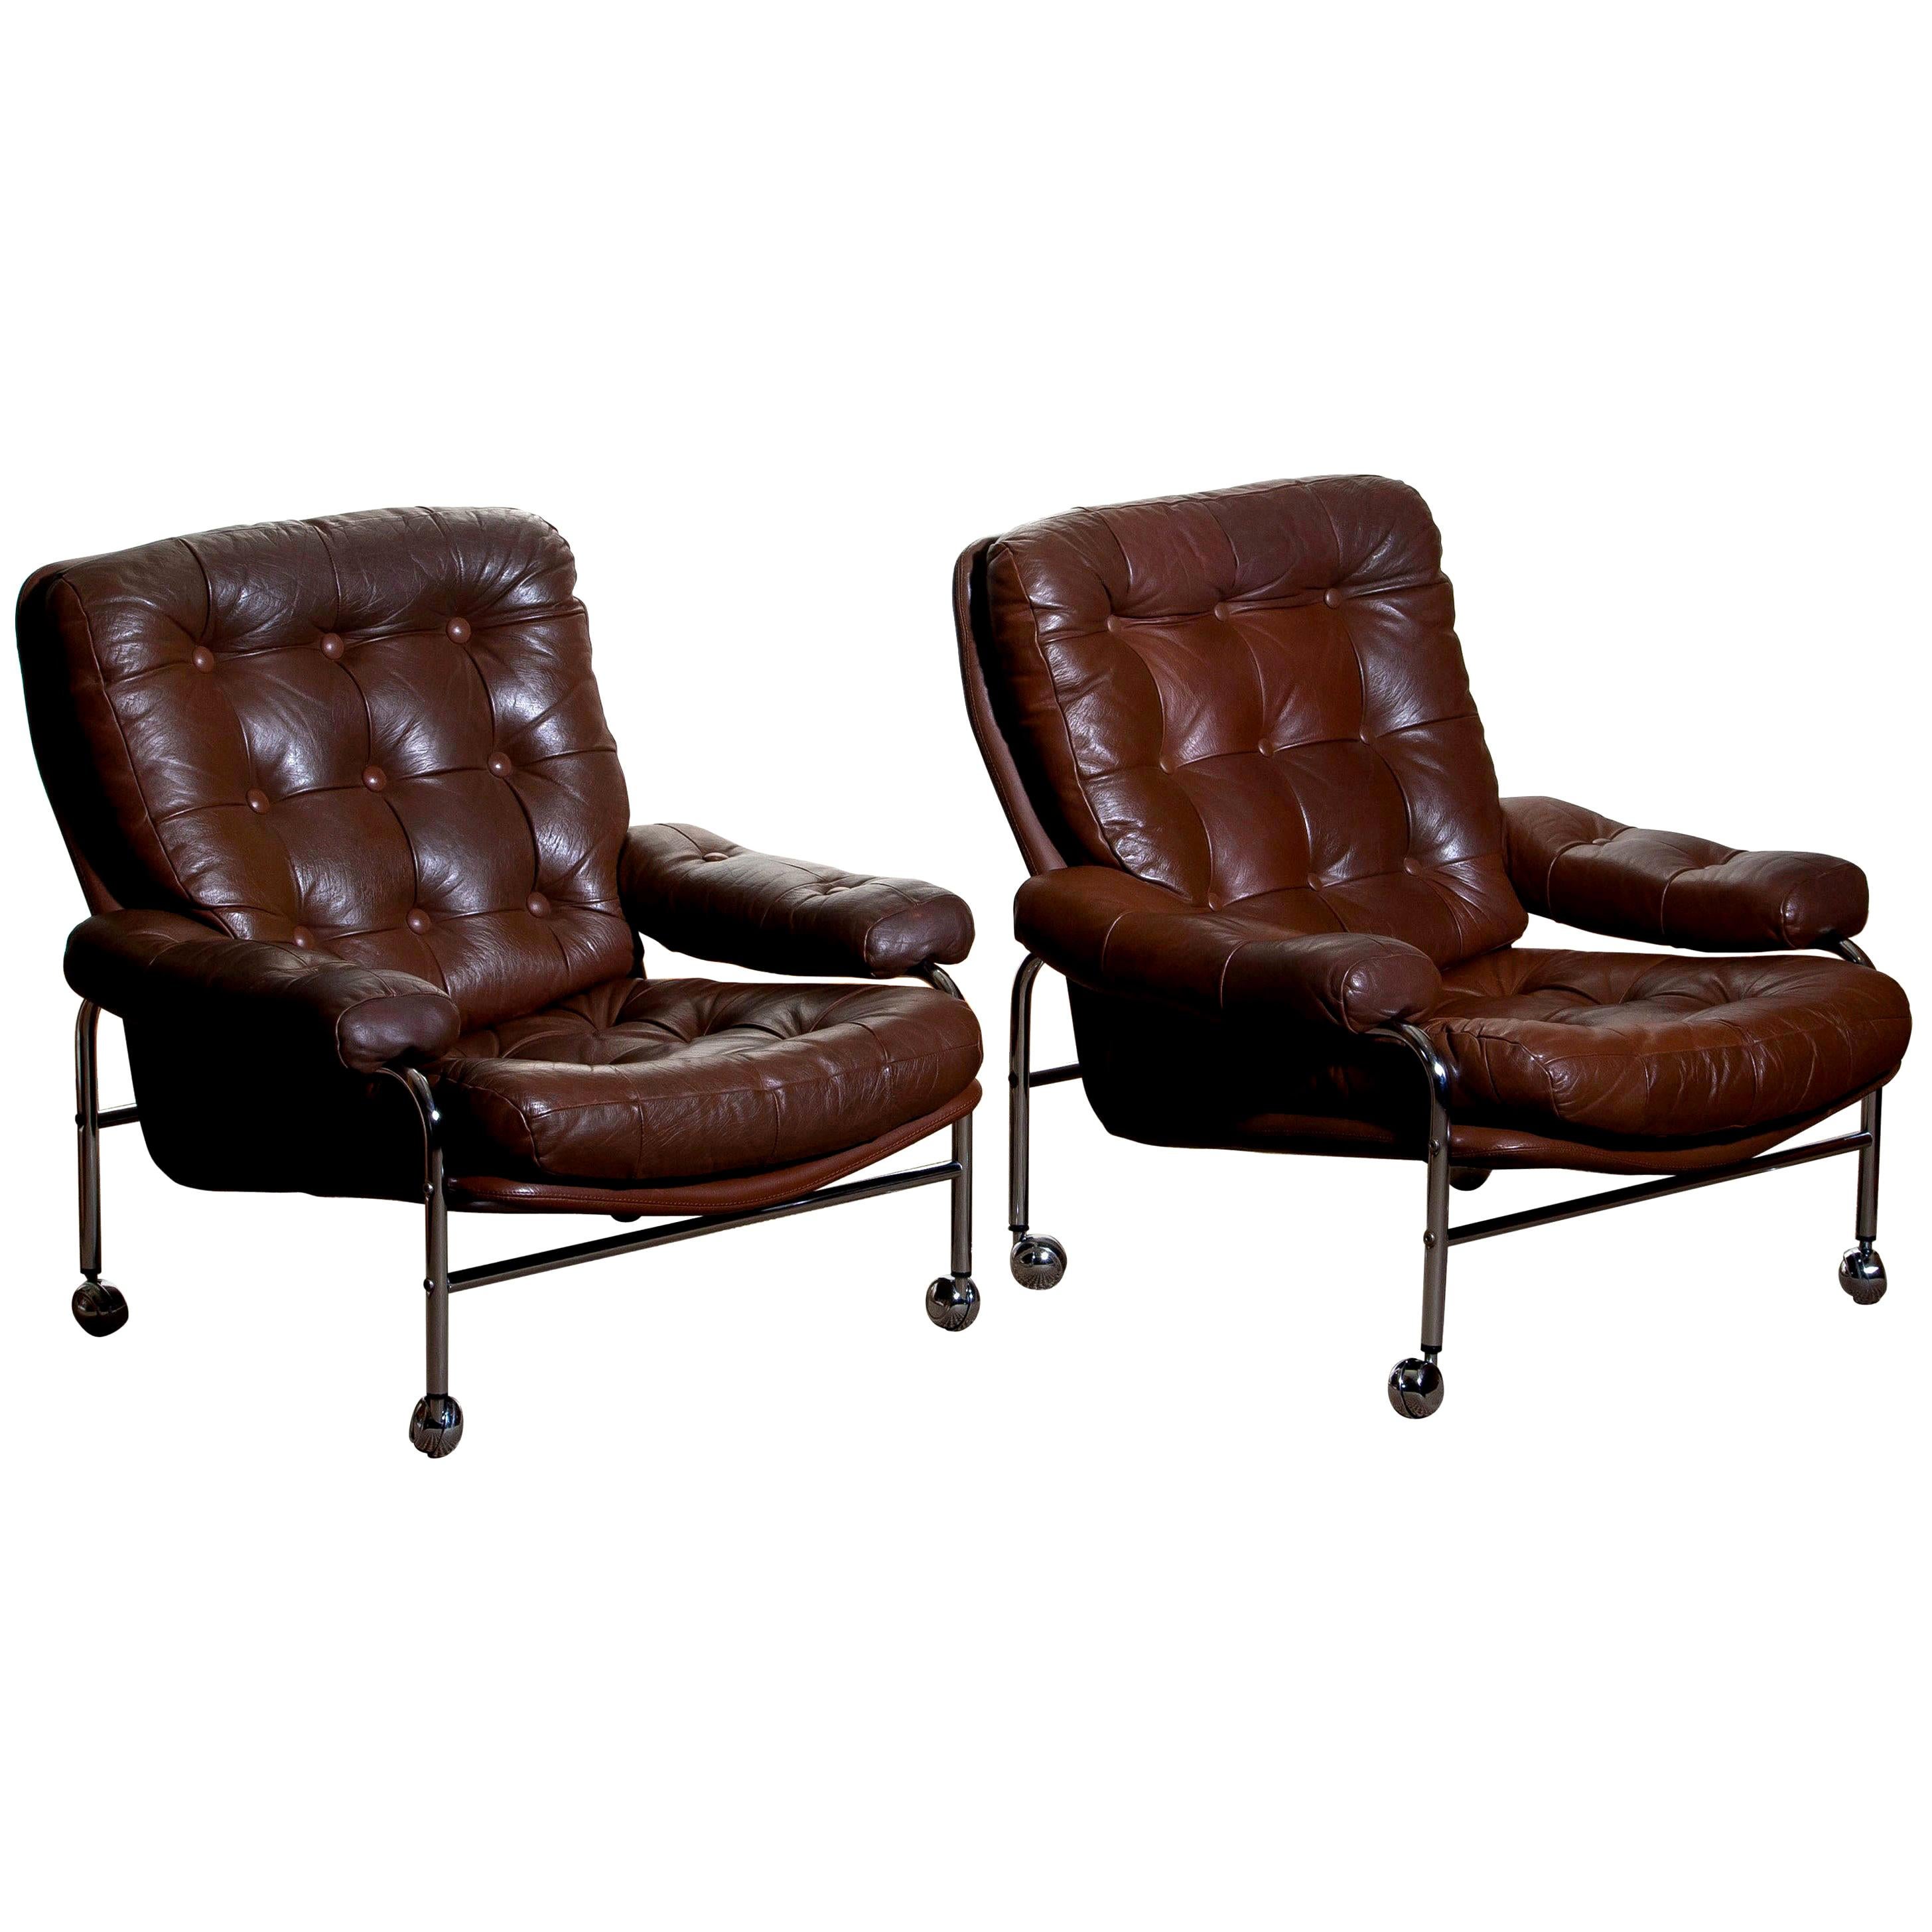 Mid-Century Modern 1970s, Chrome and Brown Leather Lounge Chairs by Scapa Rydaholm, Sweden